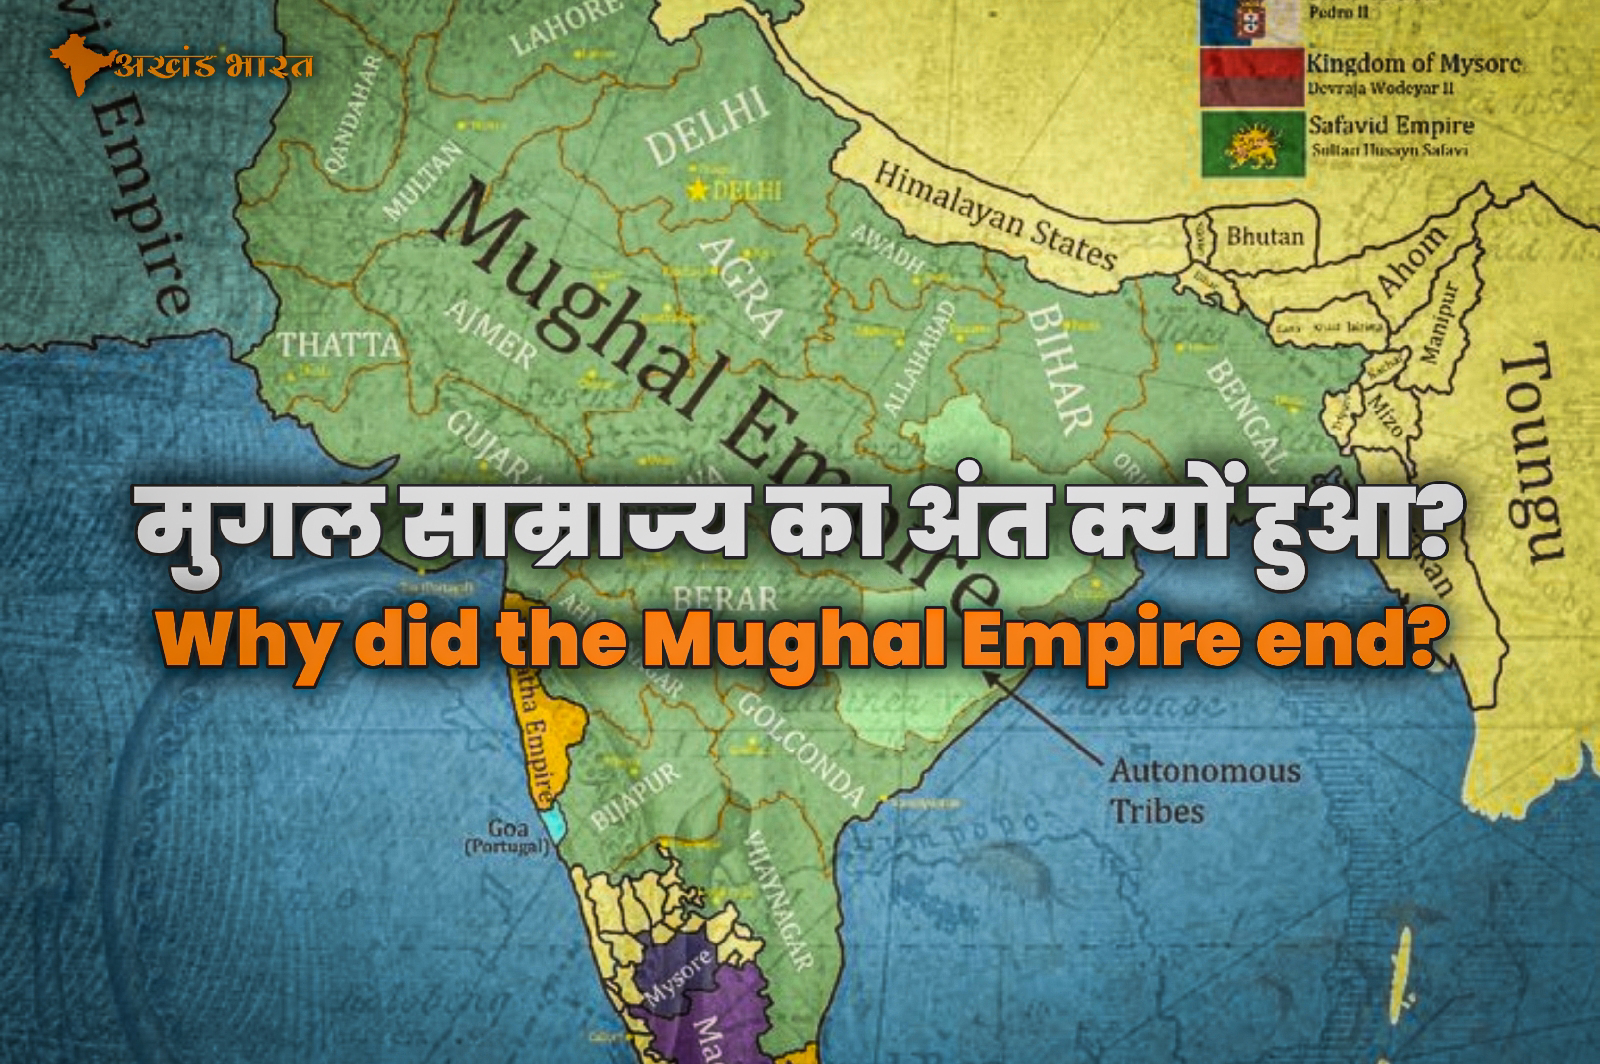 Why did the Mughal Empire end?